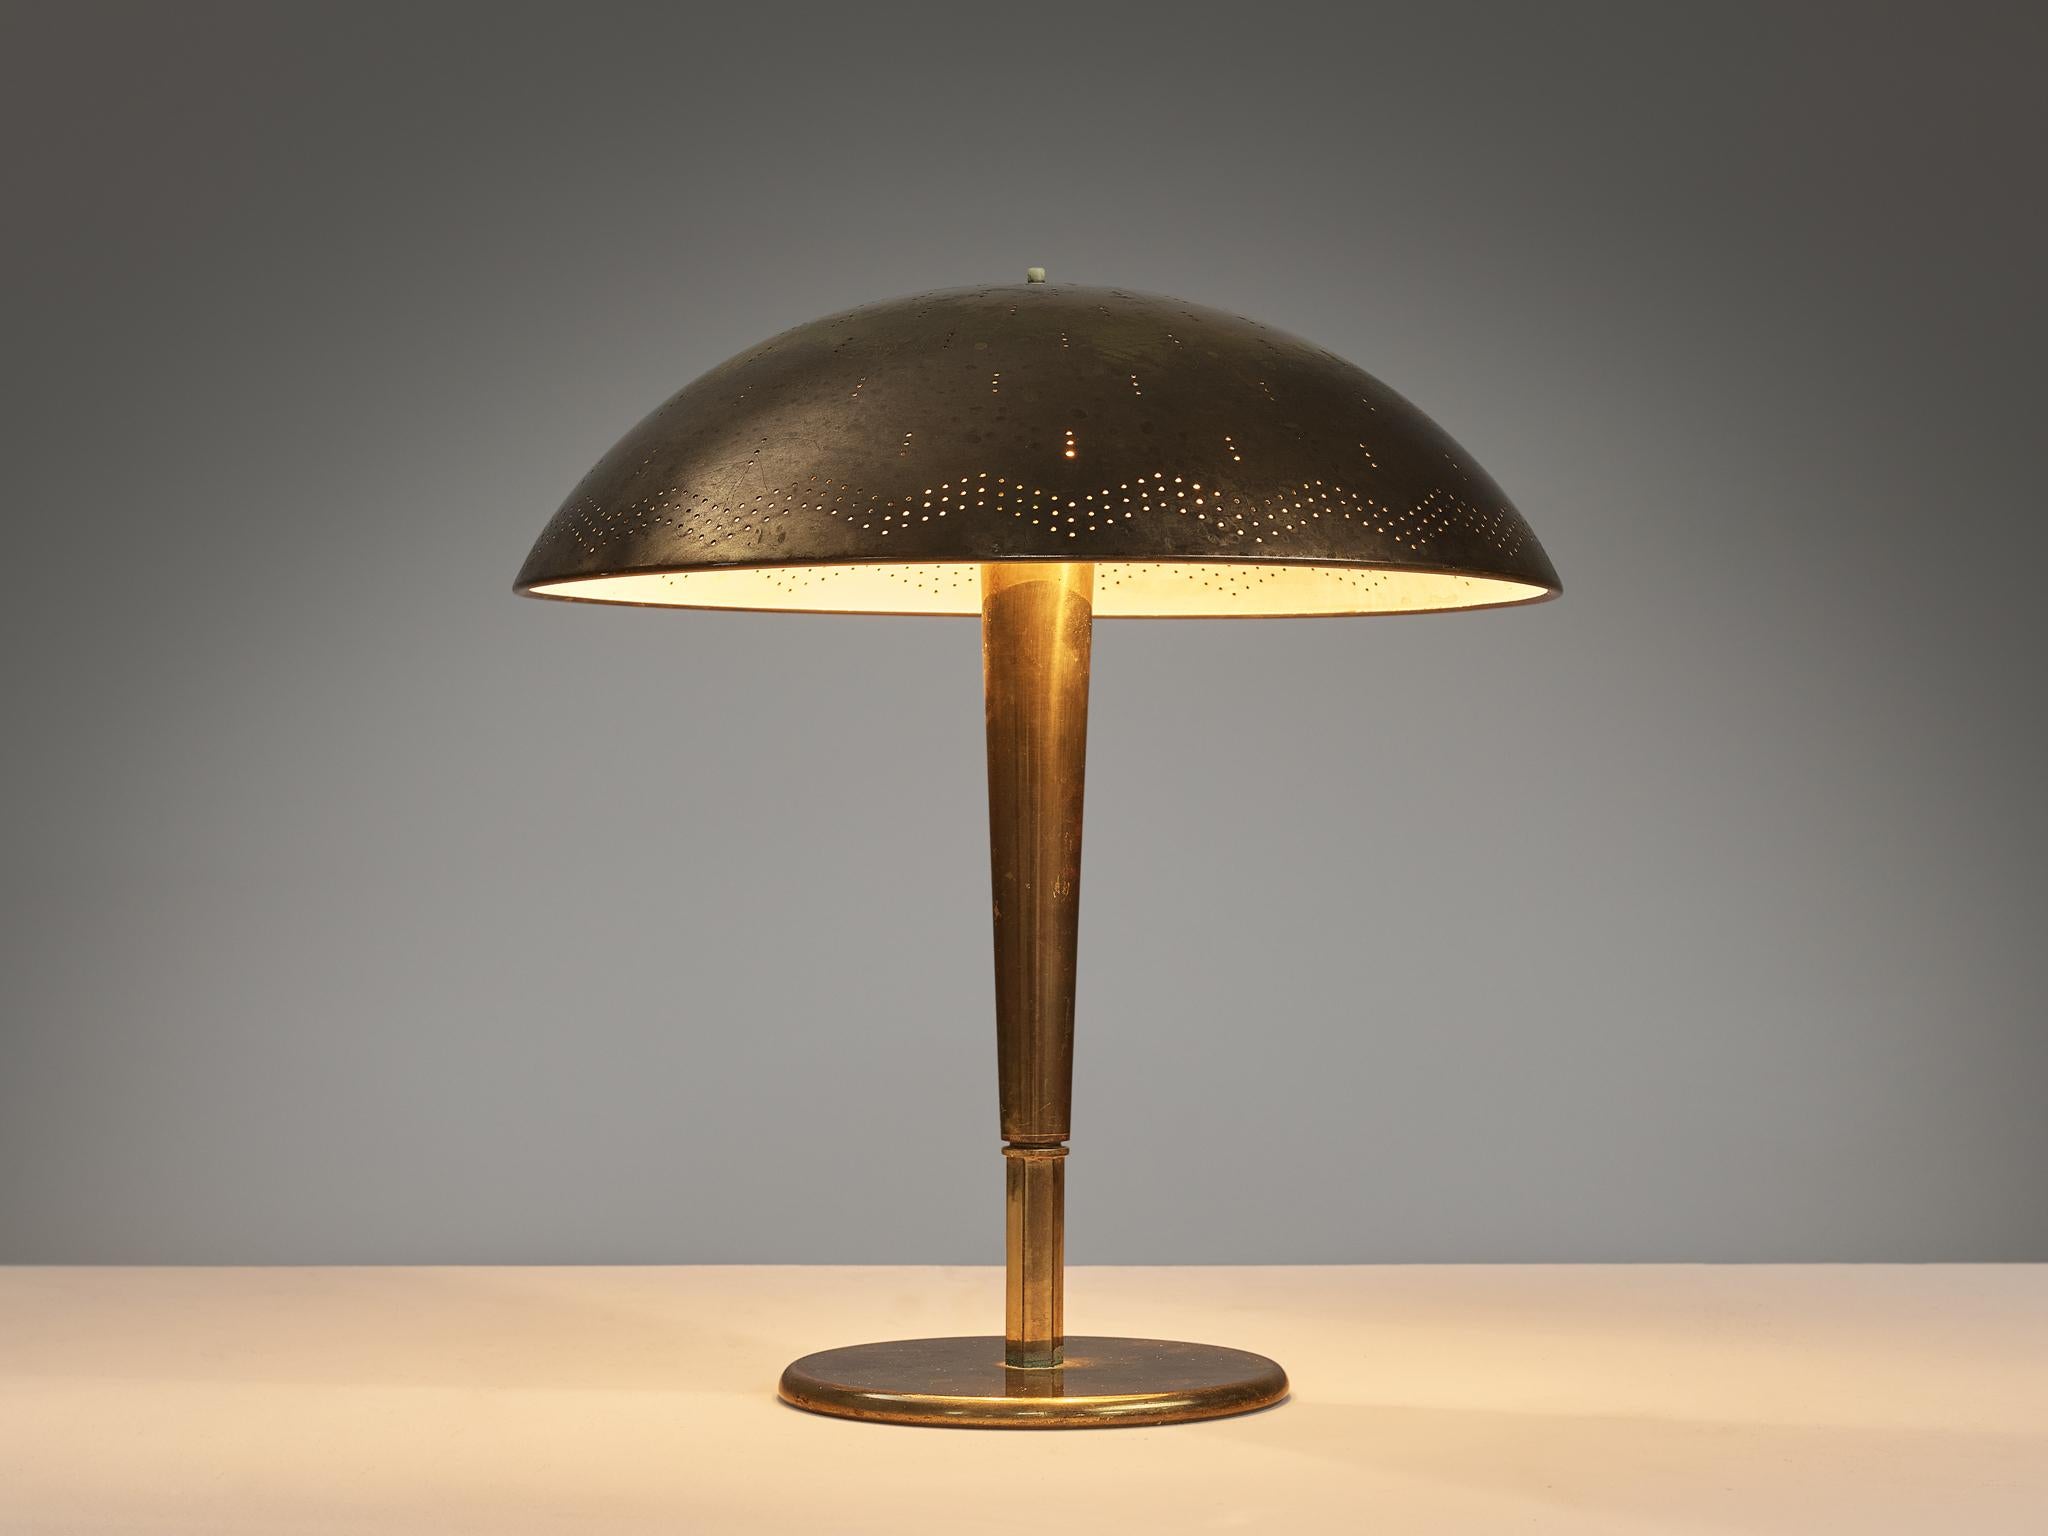 Paavo Tynell for Idman, table lamp, model ‘5061’, brass, perforated brass, Finland, circa 1950 

A truly magnificent piece that scores highly on every design aspect: execution, use of materials, craftsmanship, and detail. Paavo Tynell, the master in